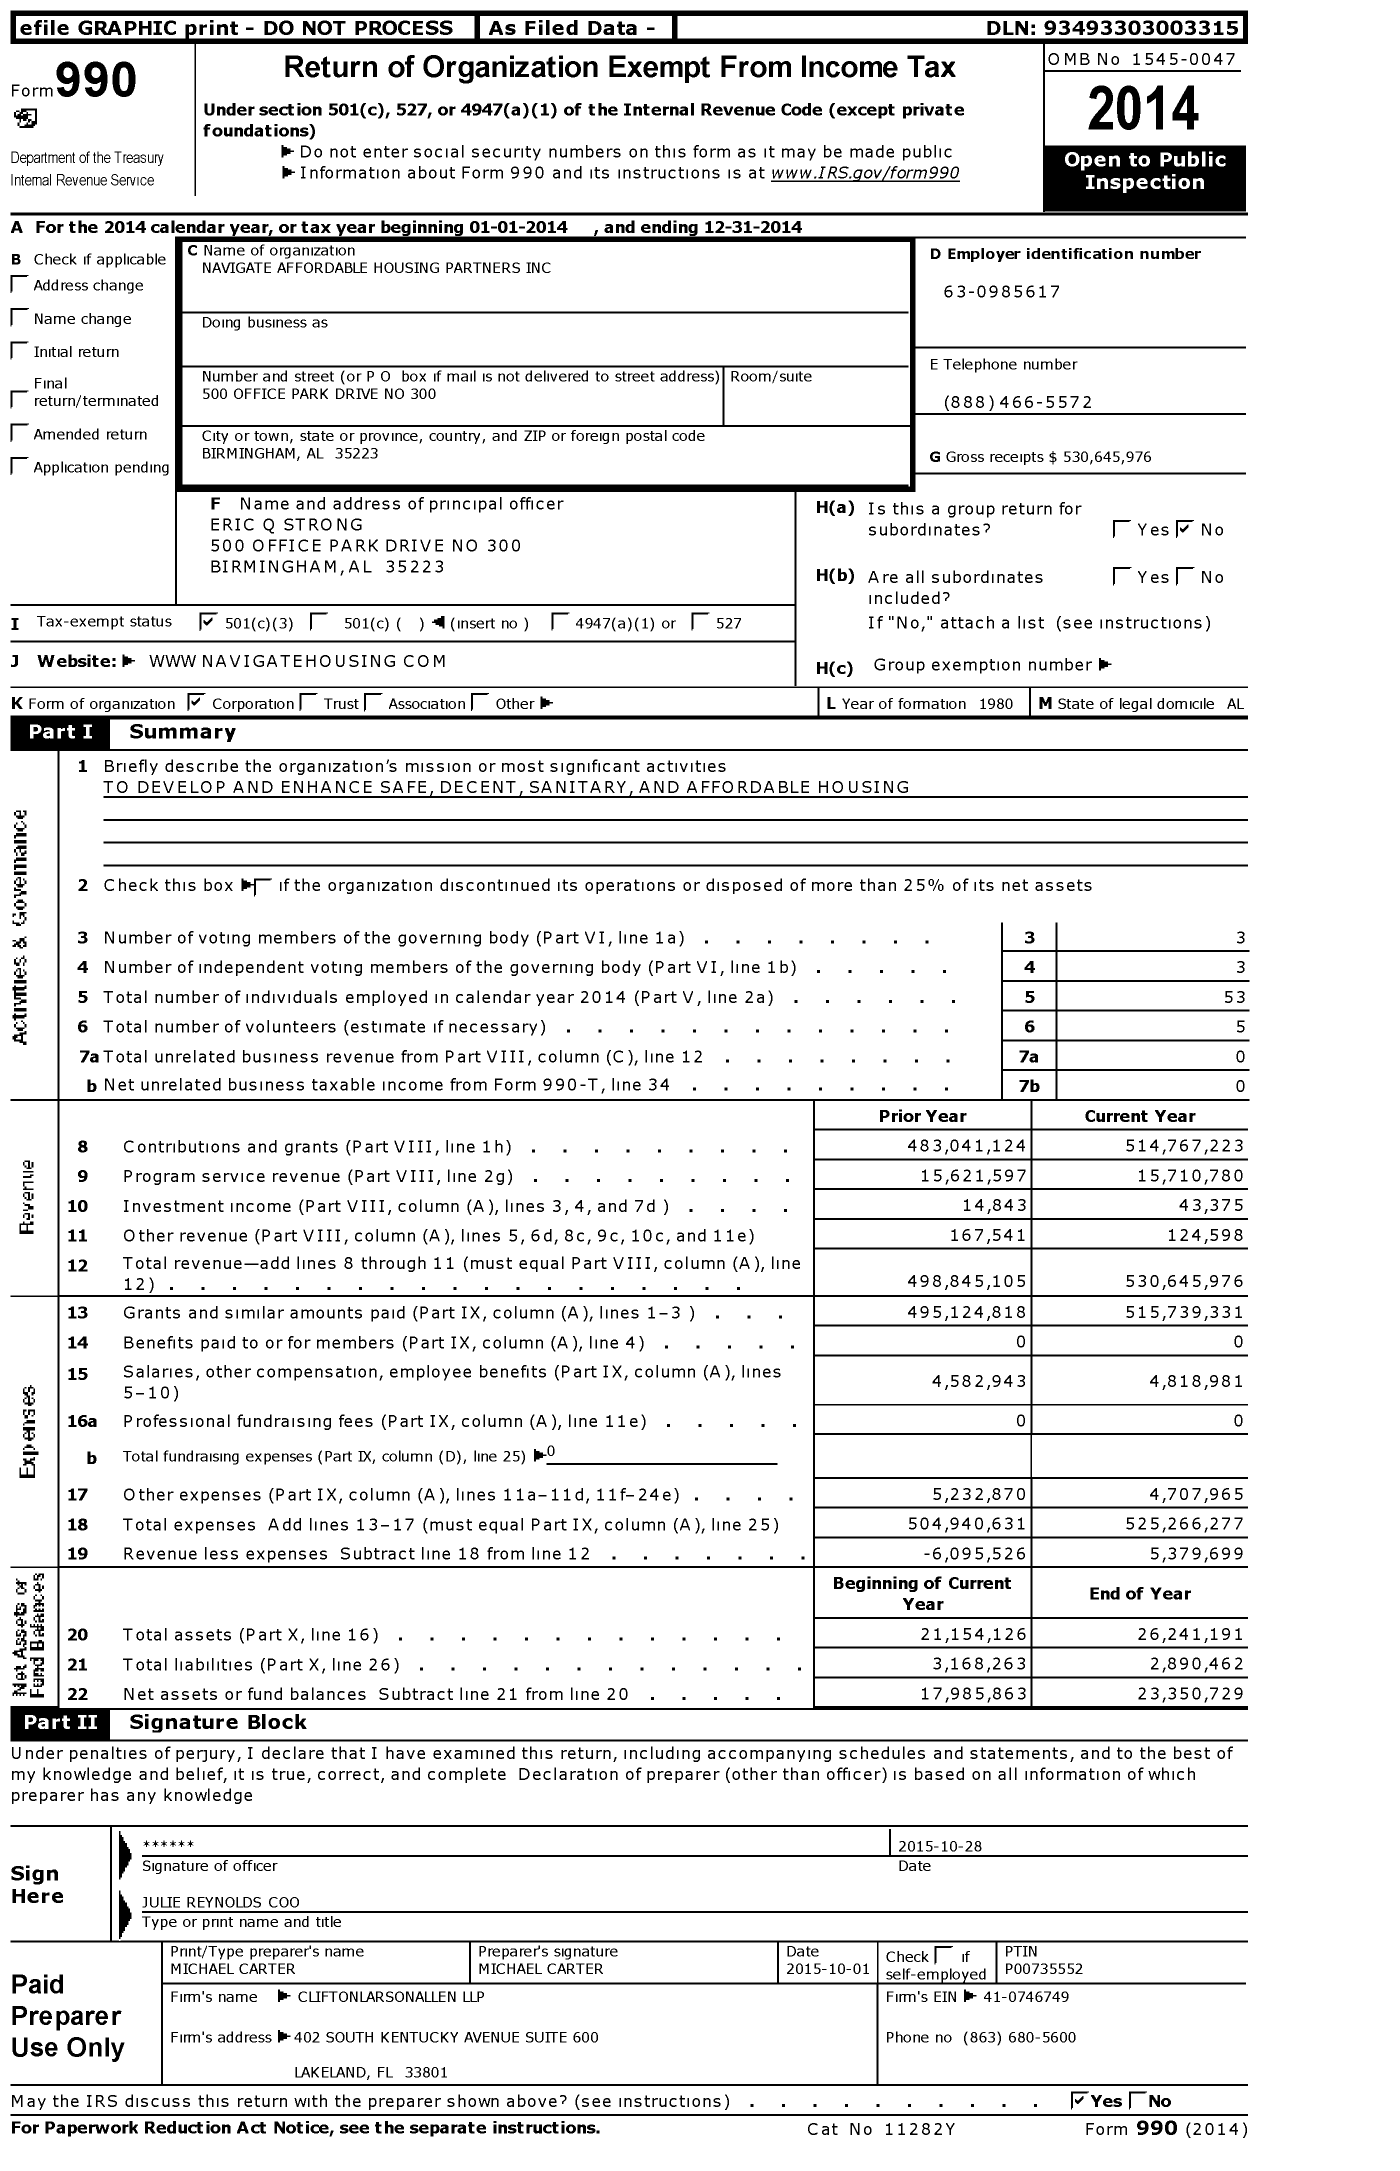 Image of first page of 2014 Form 990 for Navigate Affordable Housing Partners